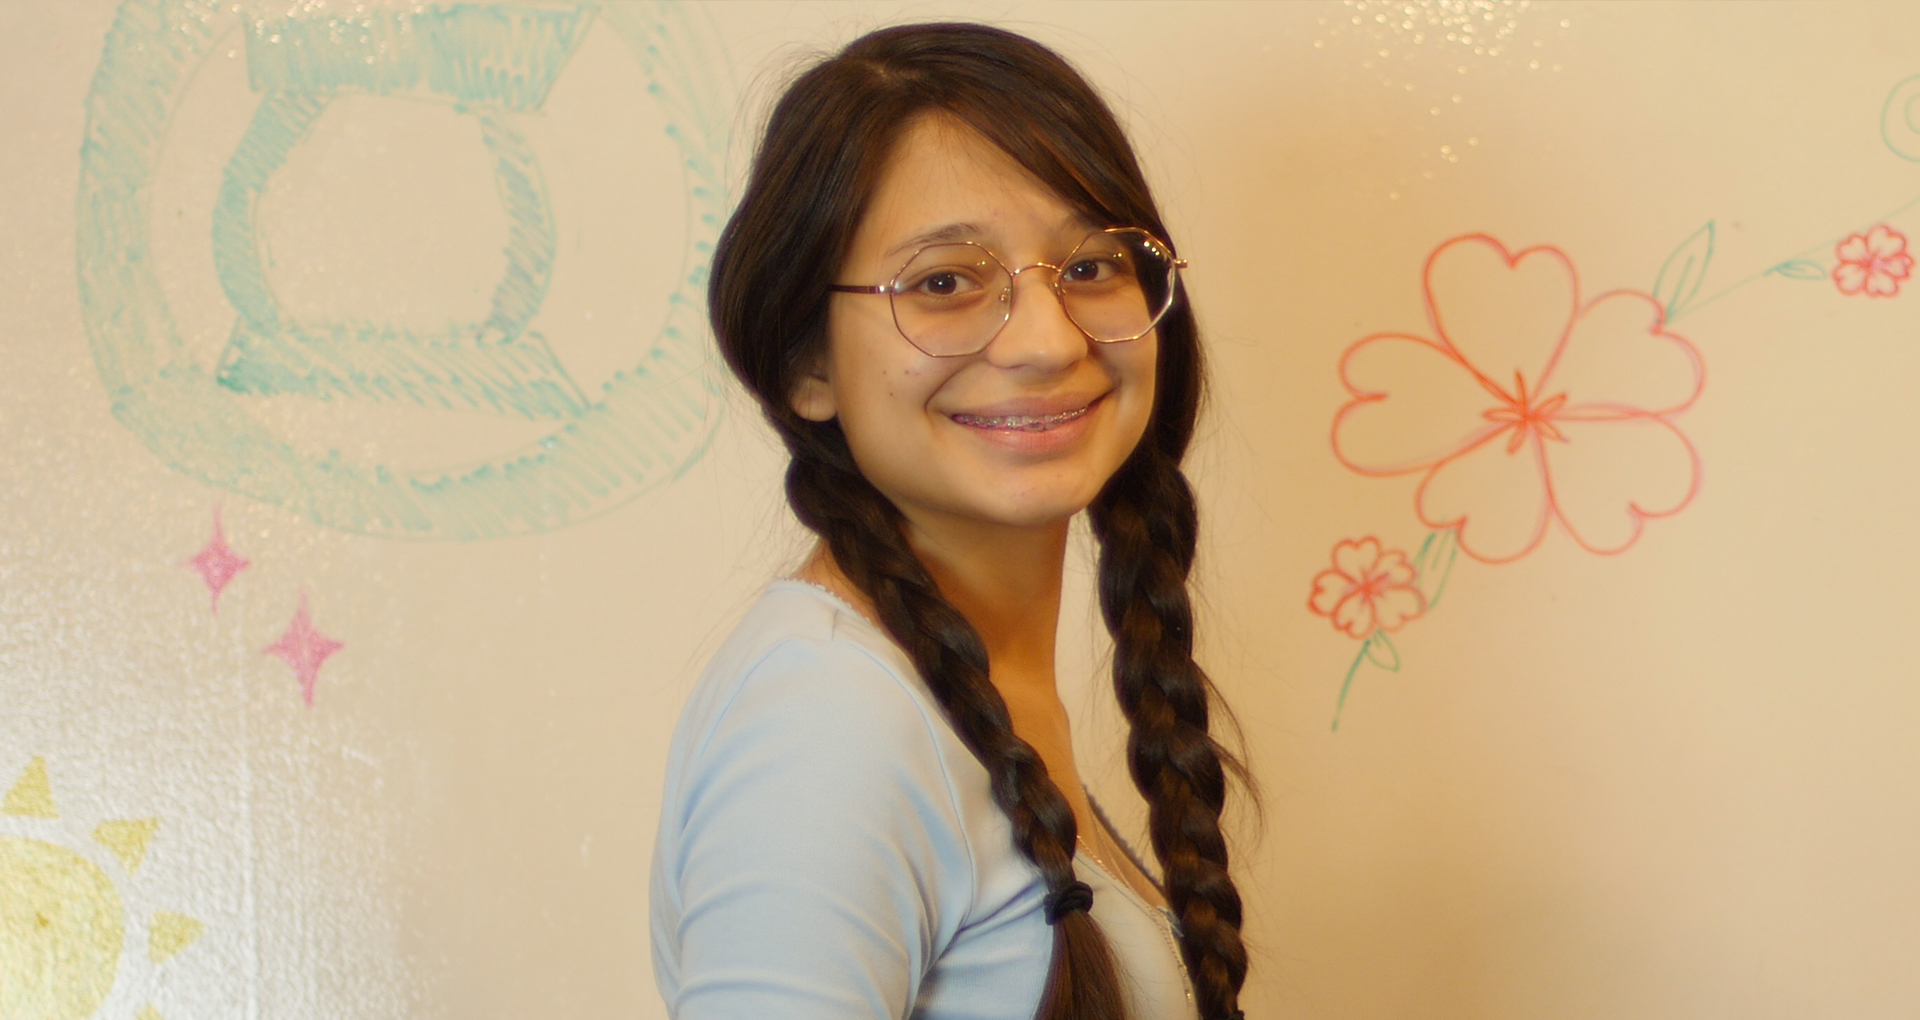 Photo of a teen volunteer smiling at the camera. Behind her are doodles on a whiteboard wall.